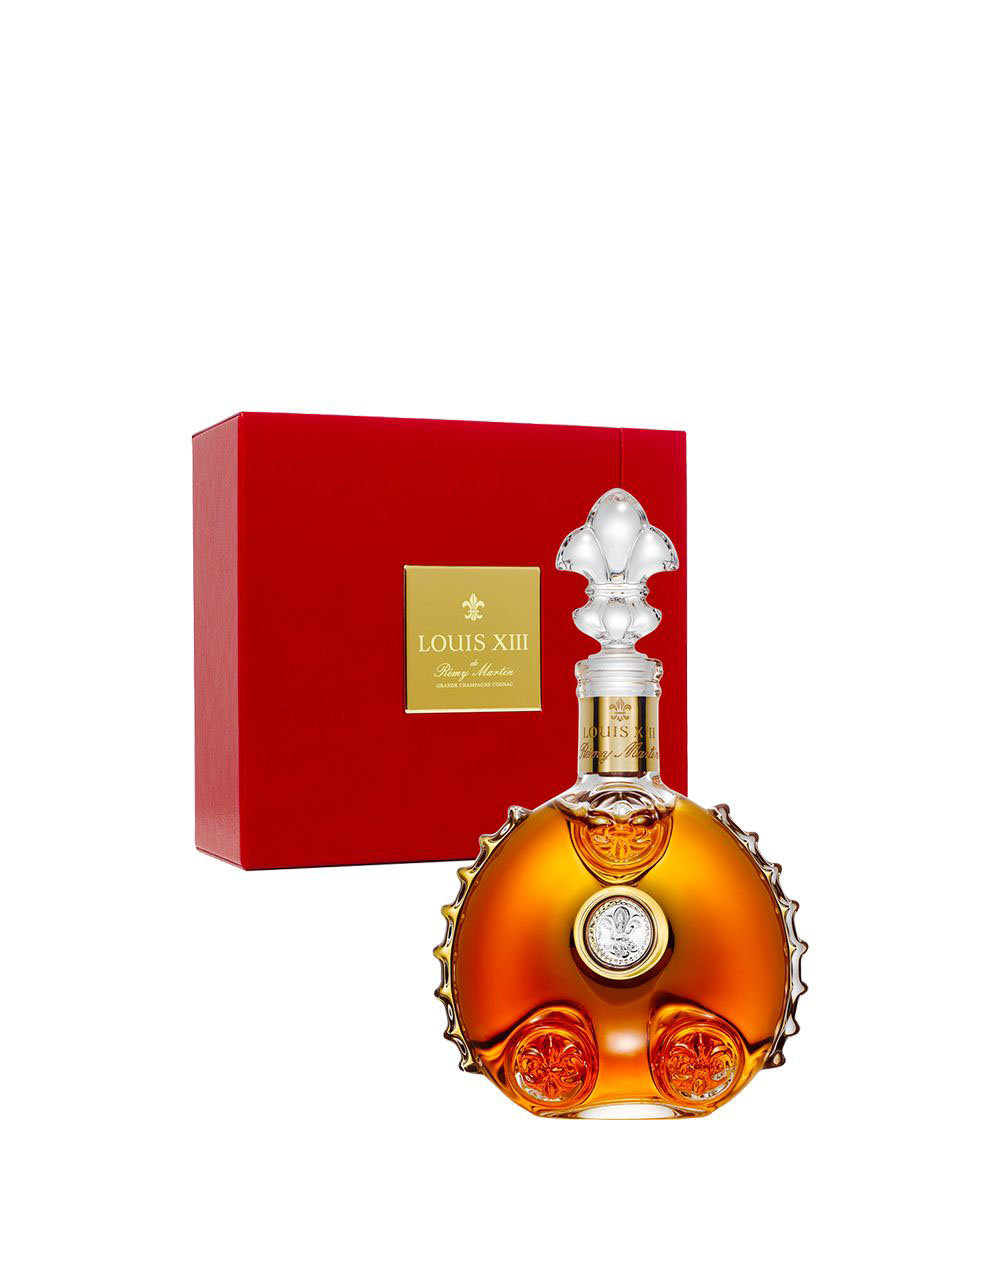 LOUIS XIII REMY Martin Grande Champagne Cognac Crystal Bottle And